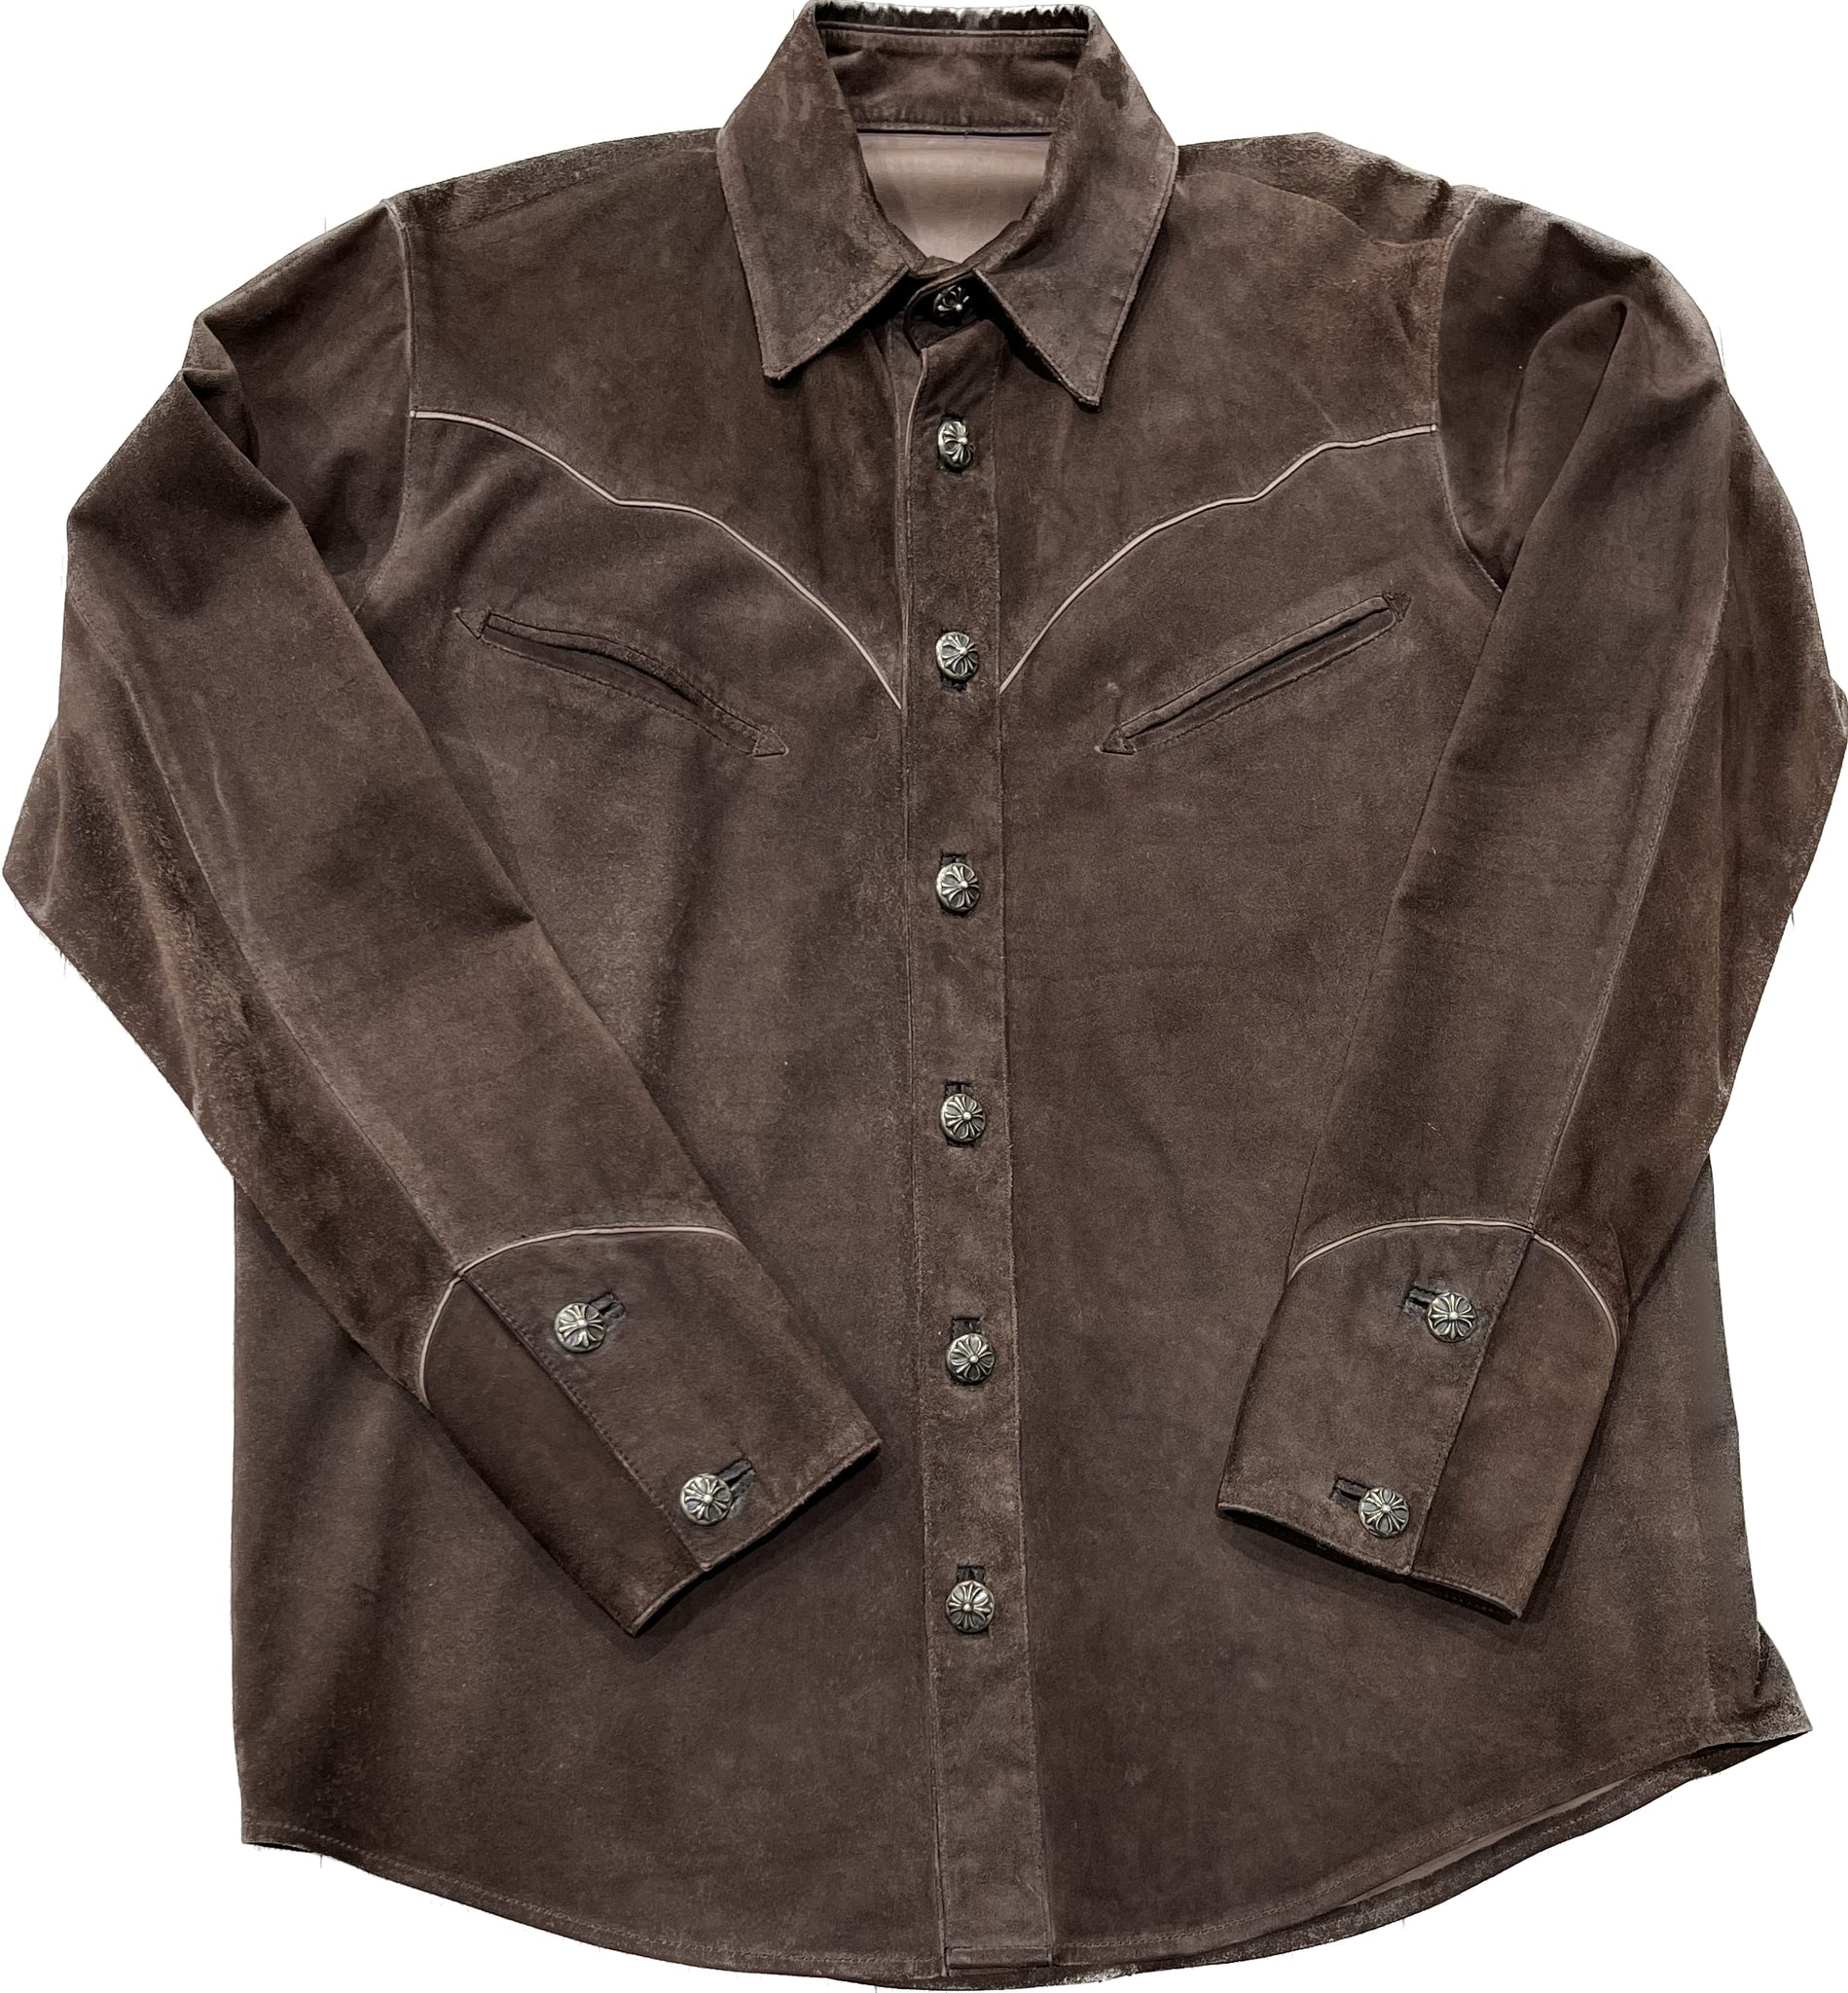 Chrome Hearts Suede Button Up Shirt Brown 1995